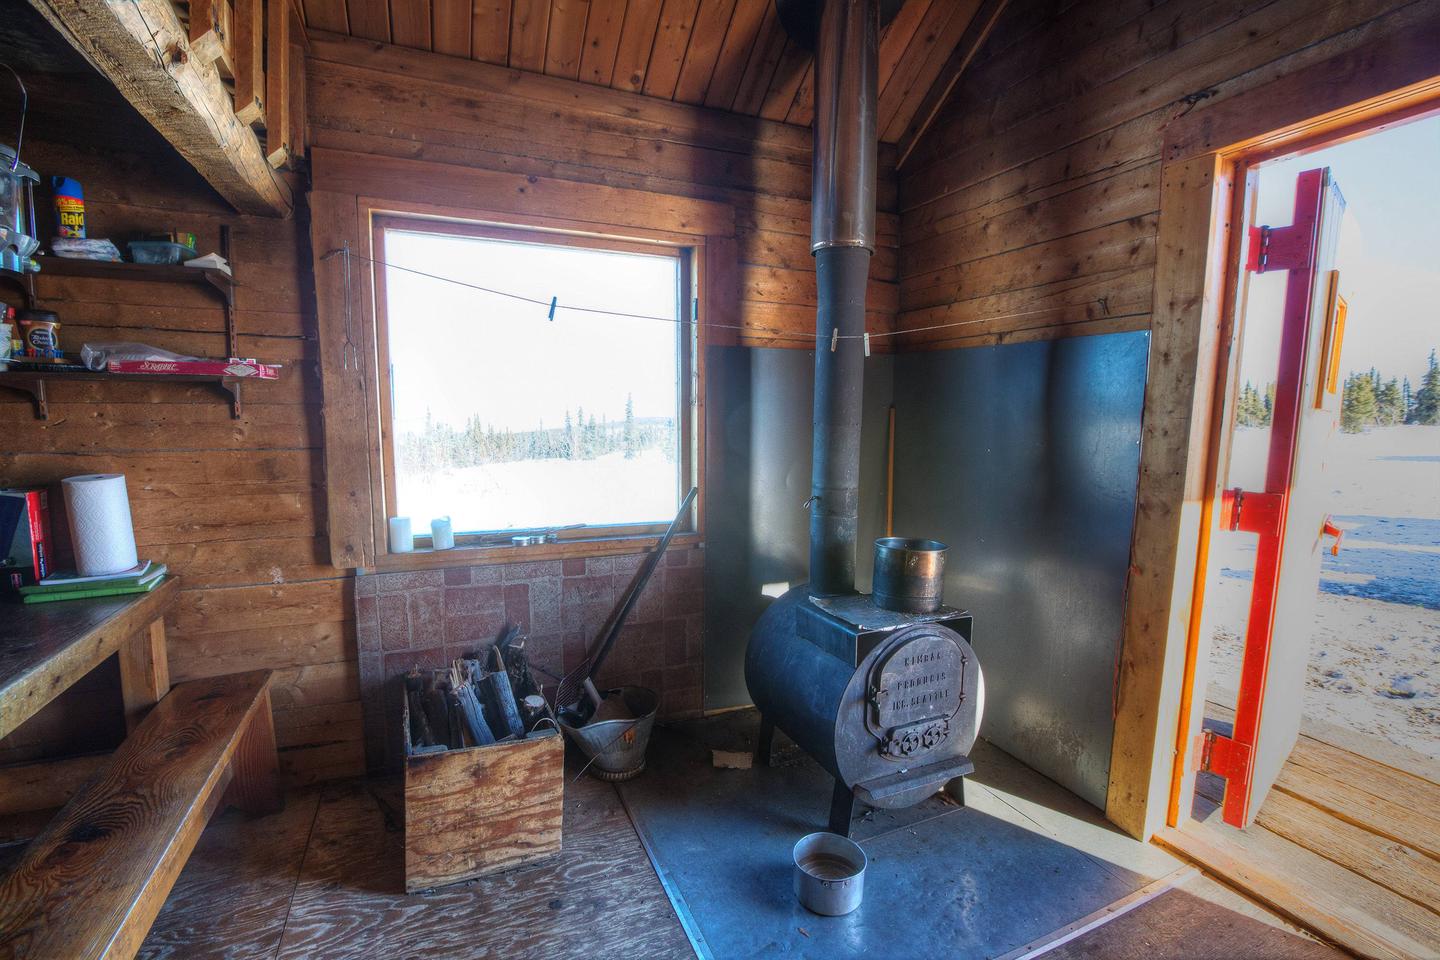 Inside view of log cabin with woodstove, window, and doorwayWoodstove and picture window at Lee's Cabin